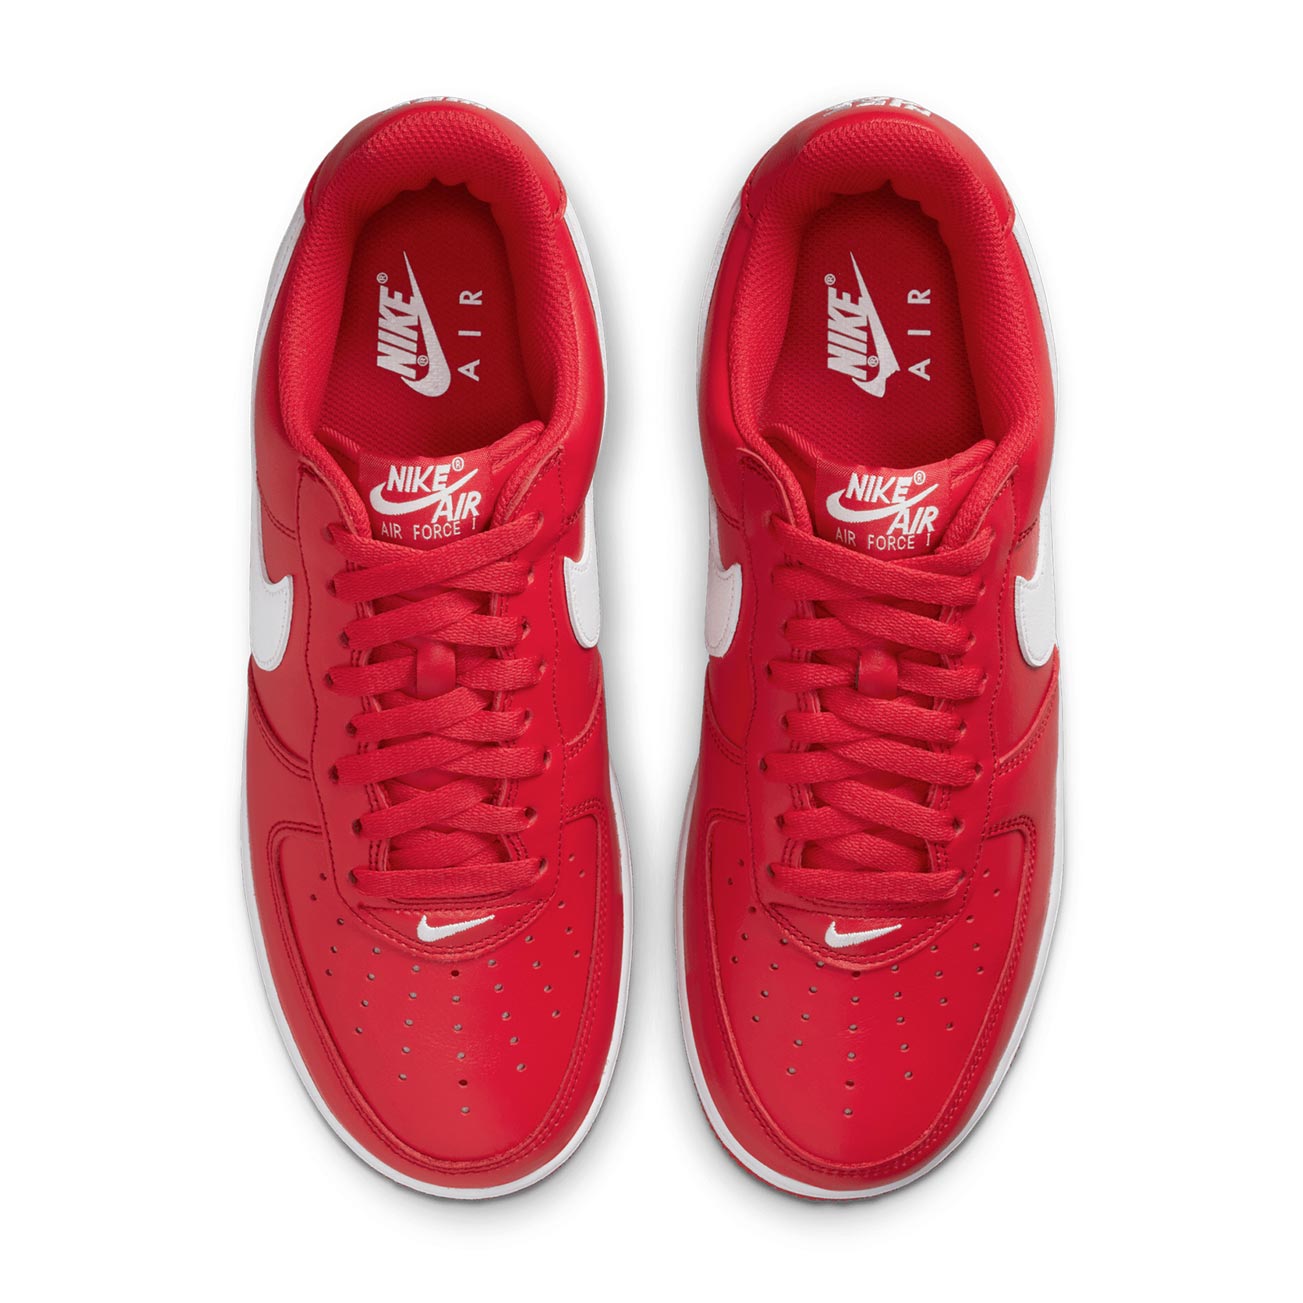 Air Force 1 Low Retro QS FD7039-600 University Red